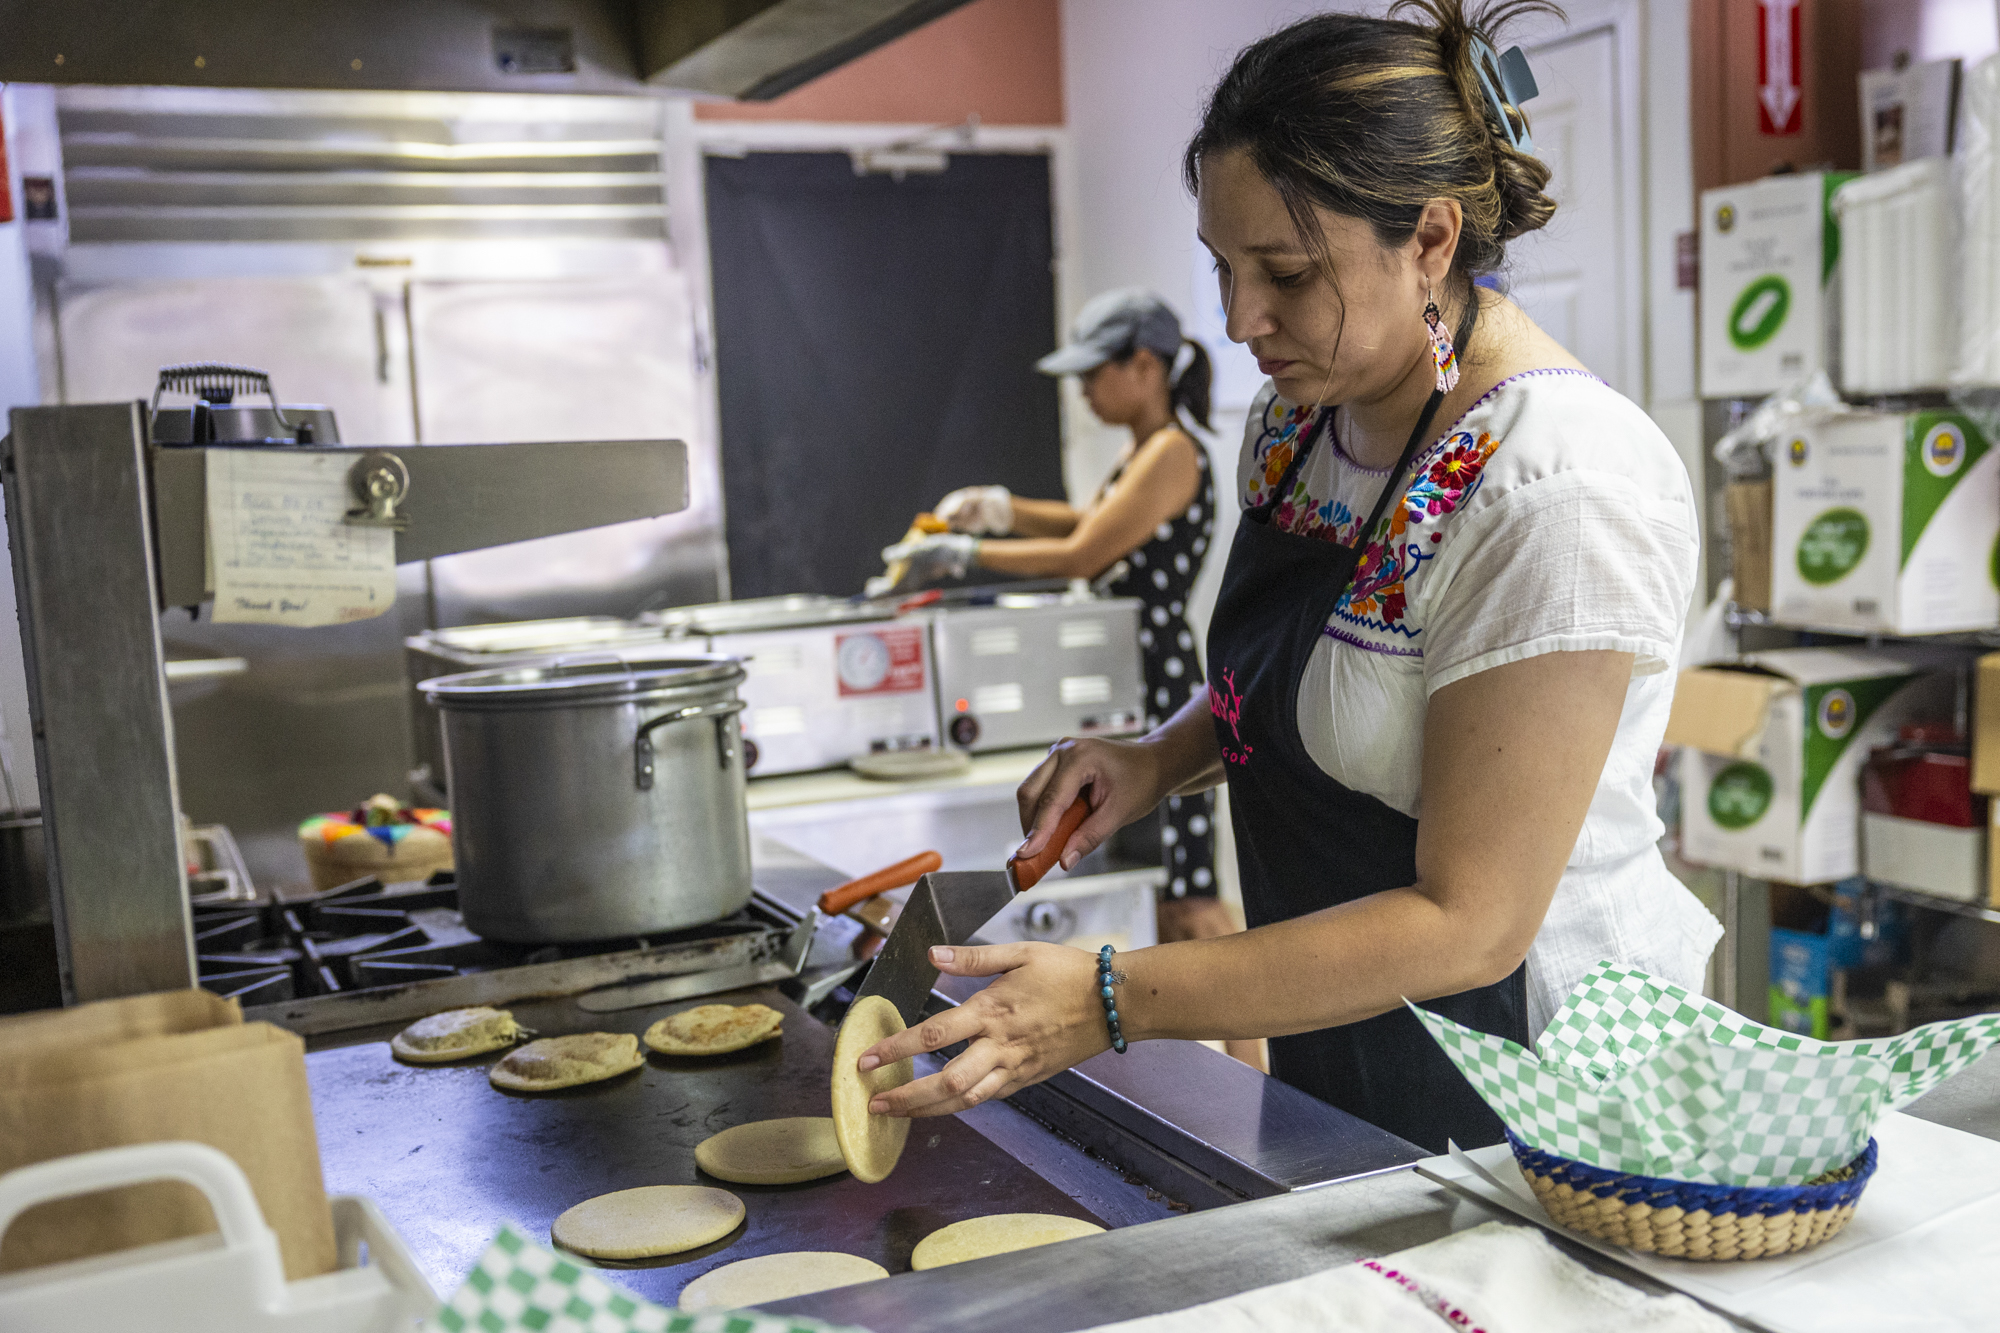 Two women are seen in a kitchen. The woman wearing an apron and closest to the camera turns over a gordita with her hand and utensil.